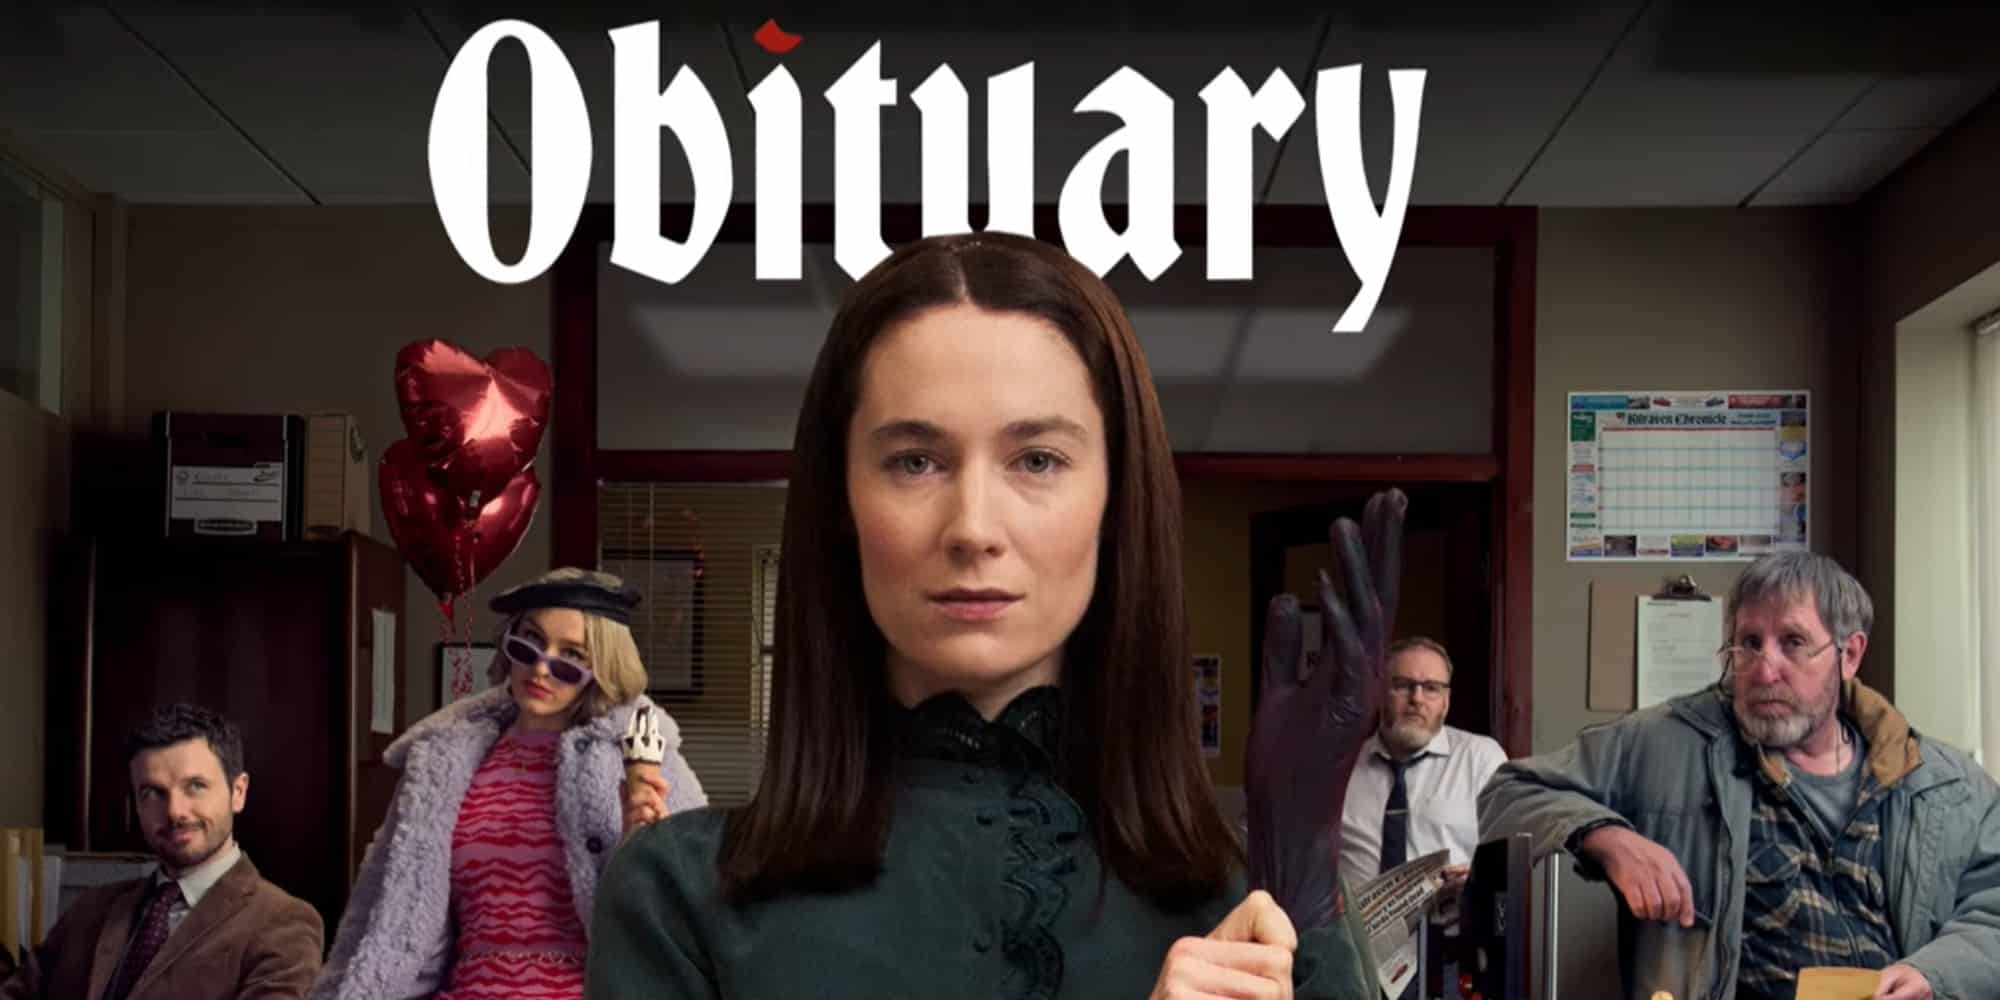 Obituary Episode 1: Release Date, Preview & Where To Watch